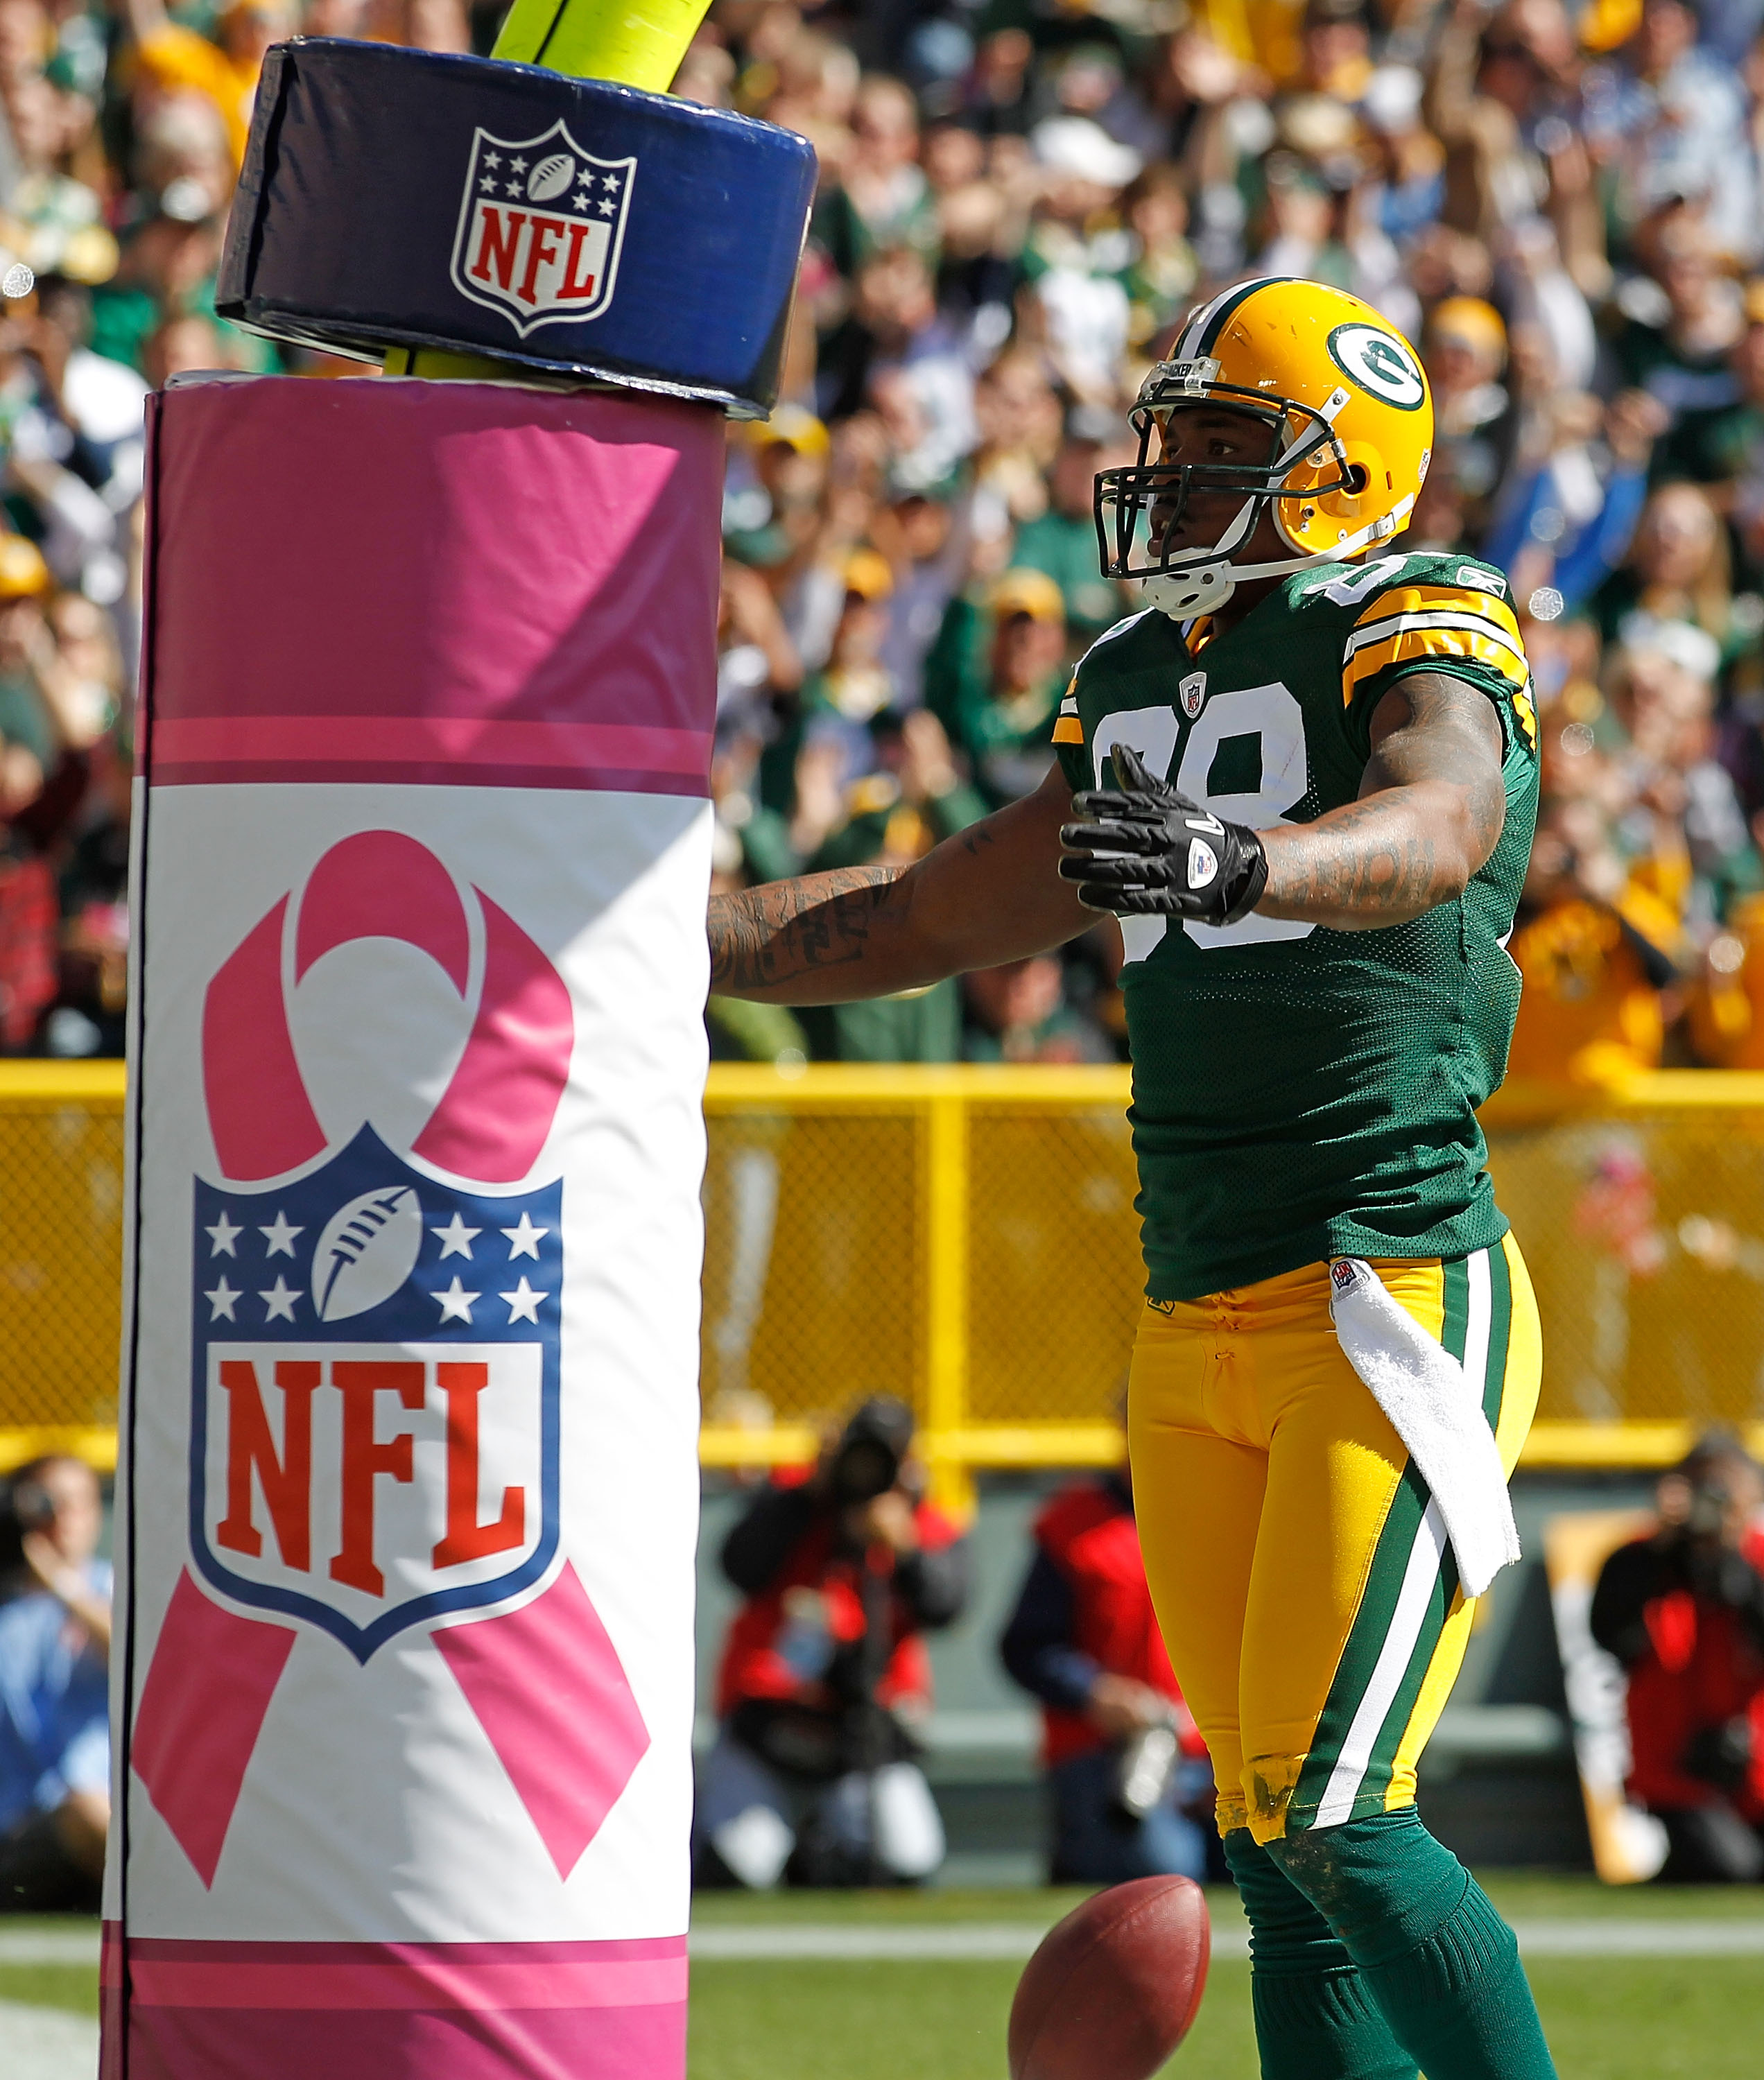 GREEN BAY, WI - OCTOBER 03: Jermichael Finley #88 of the Green Bay Packers celebrates a touchdown catch against the Detroit Lions in front of a goal post wrapped with a breast cancer awarness pad at Lambeau Field on October 3, 2010 in Green Bay, Wisconsin